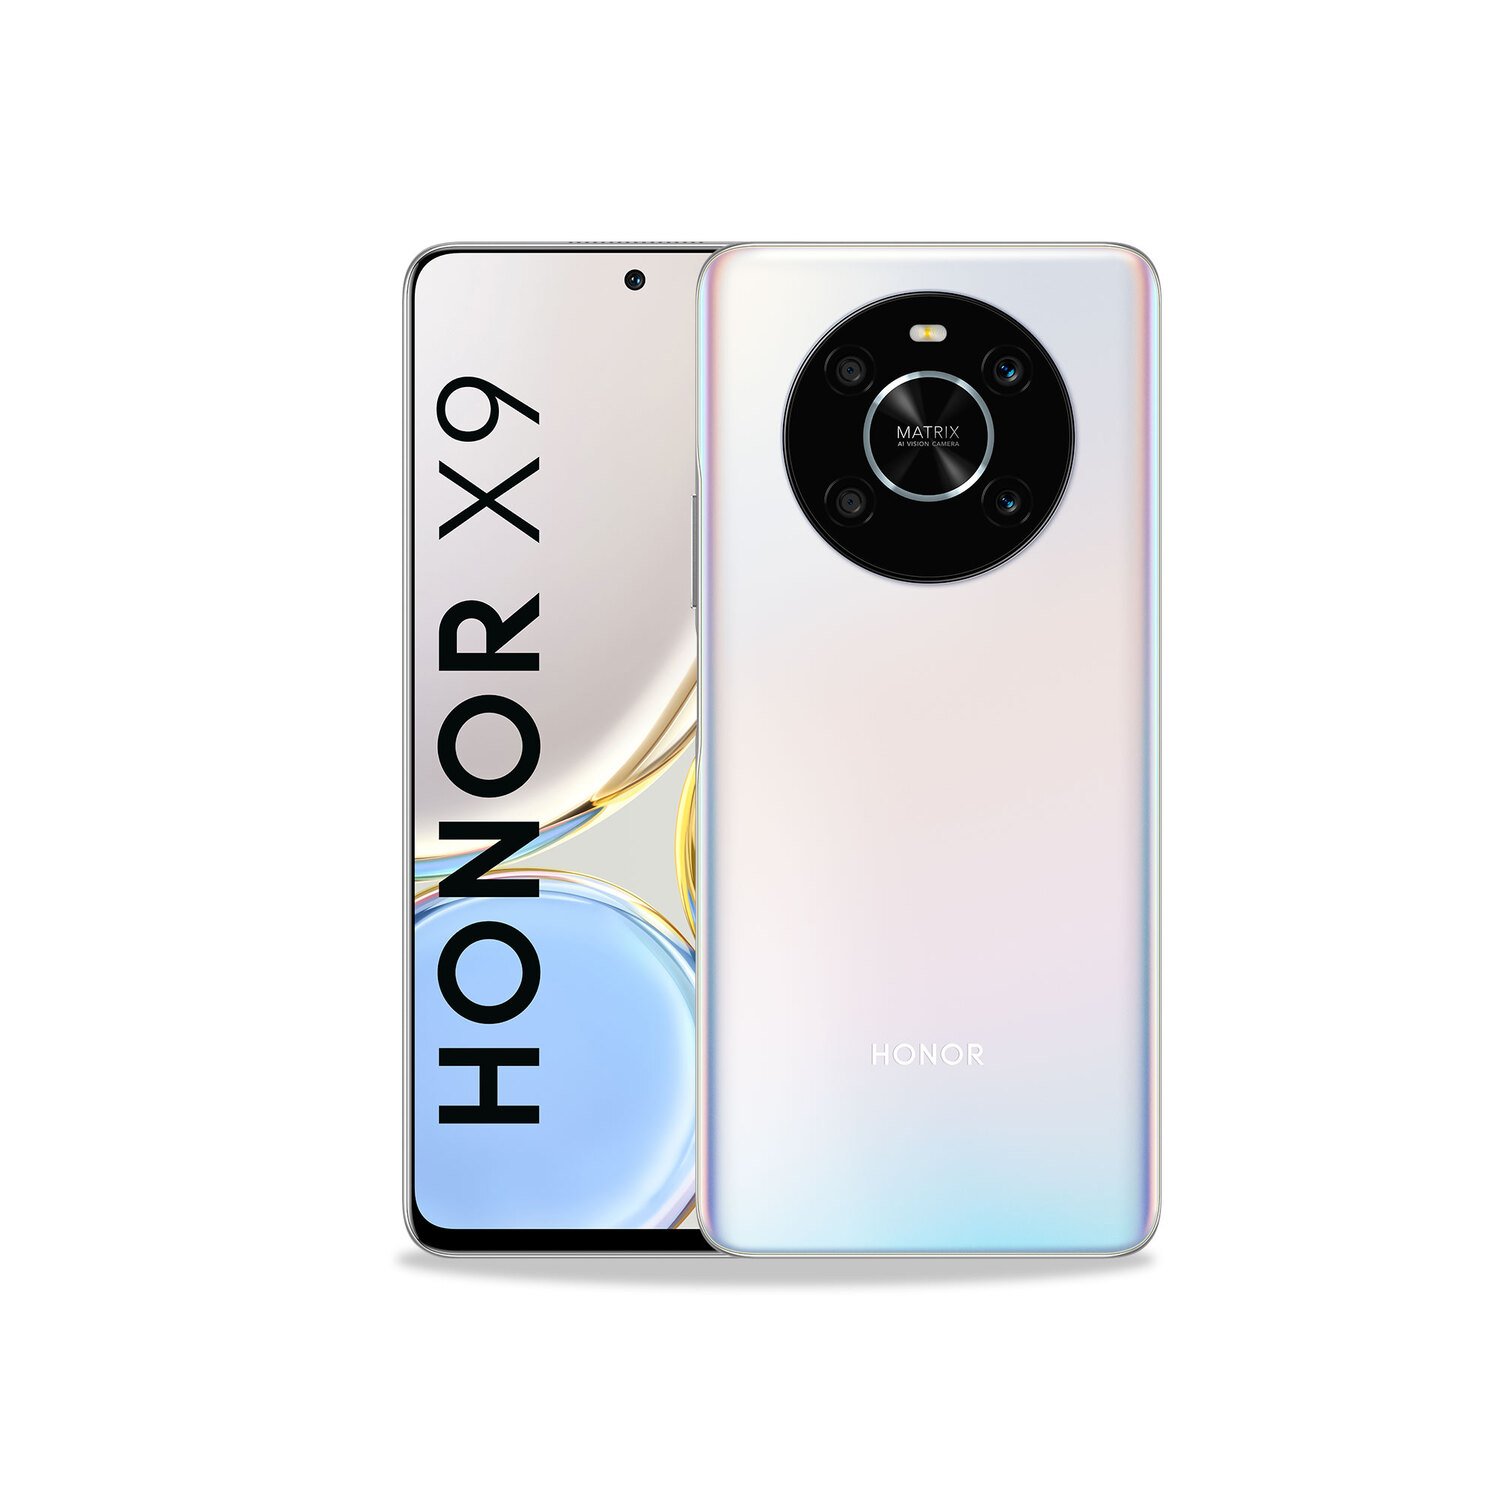 HONOR 4G ANY-LX3 X9 128GB, color plata